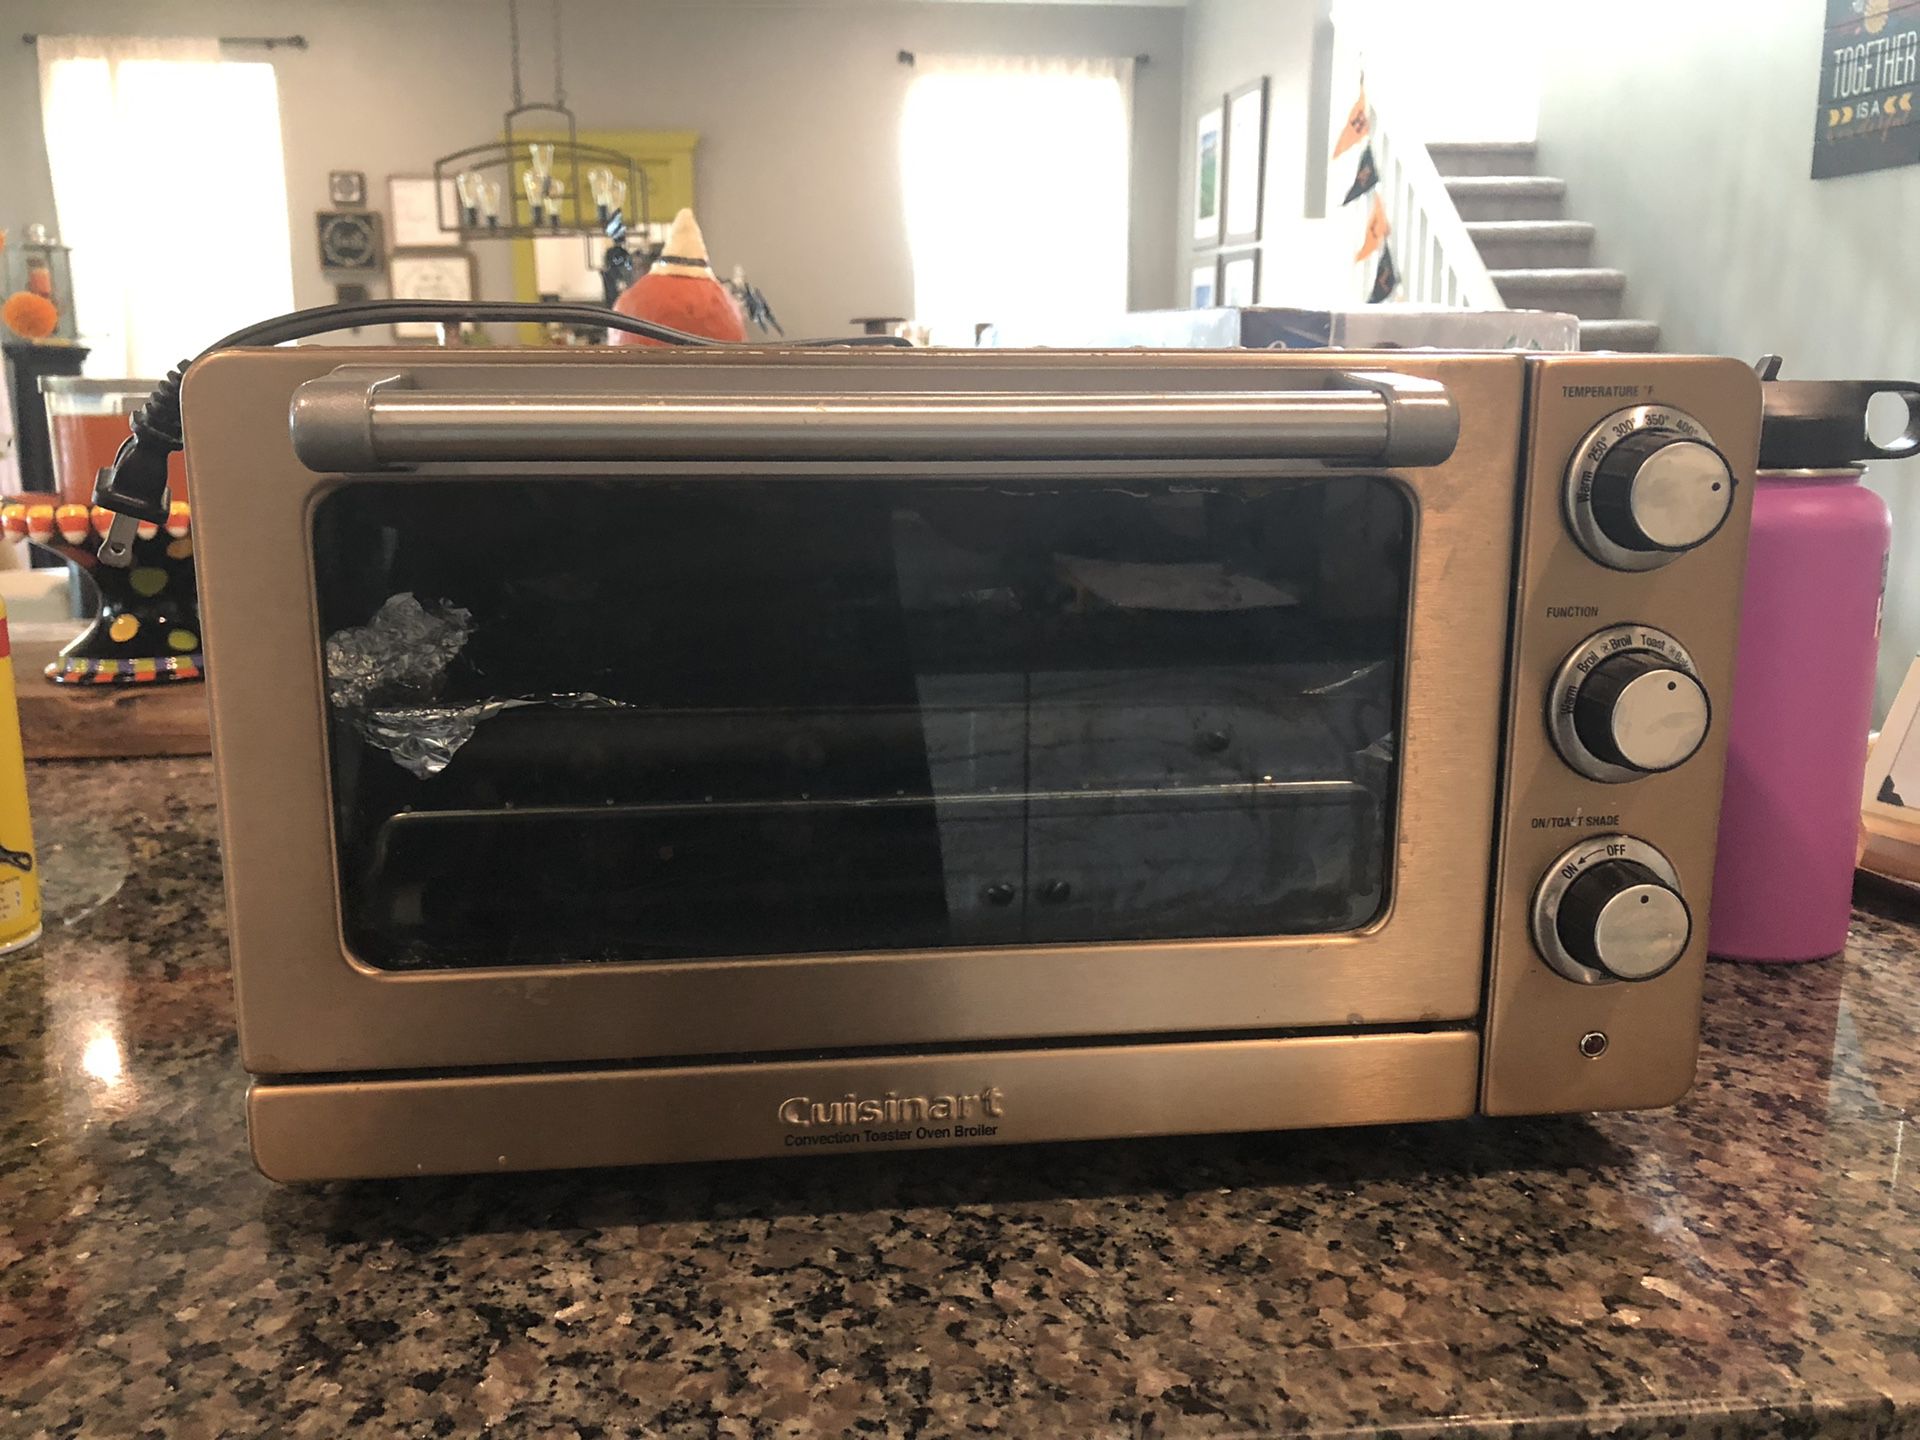 Cuisinart copper colored toaster oven